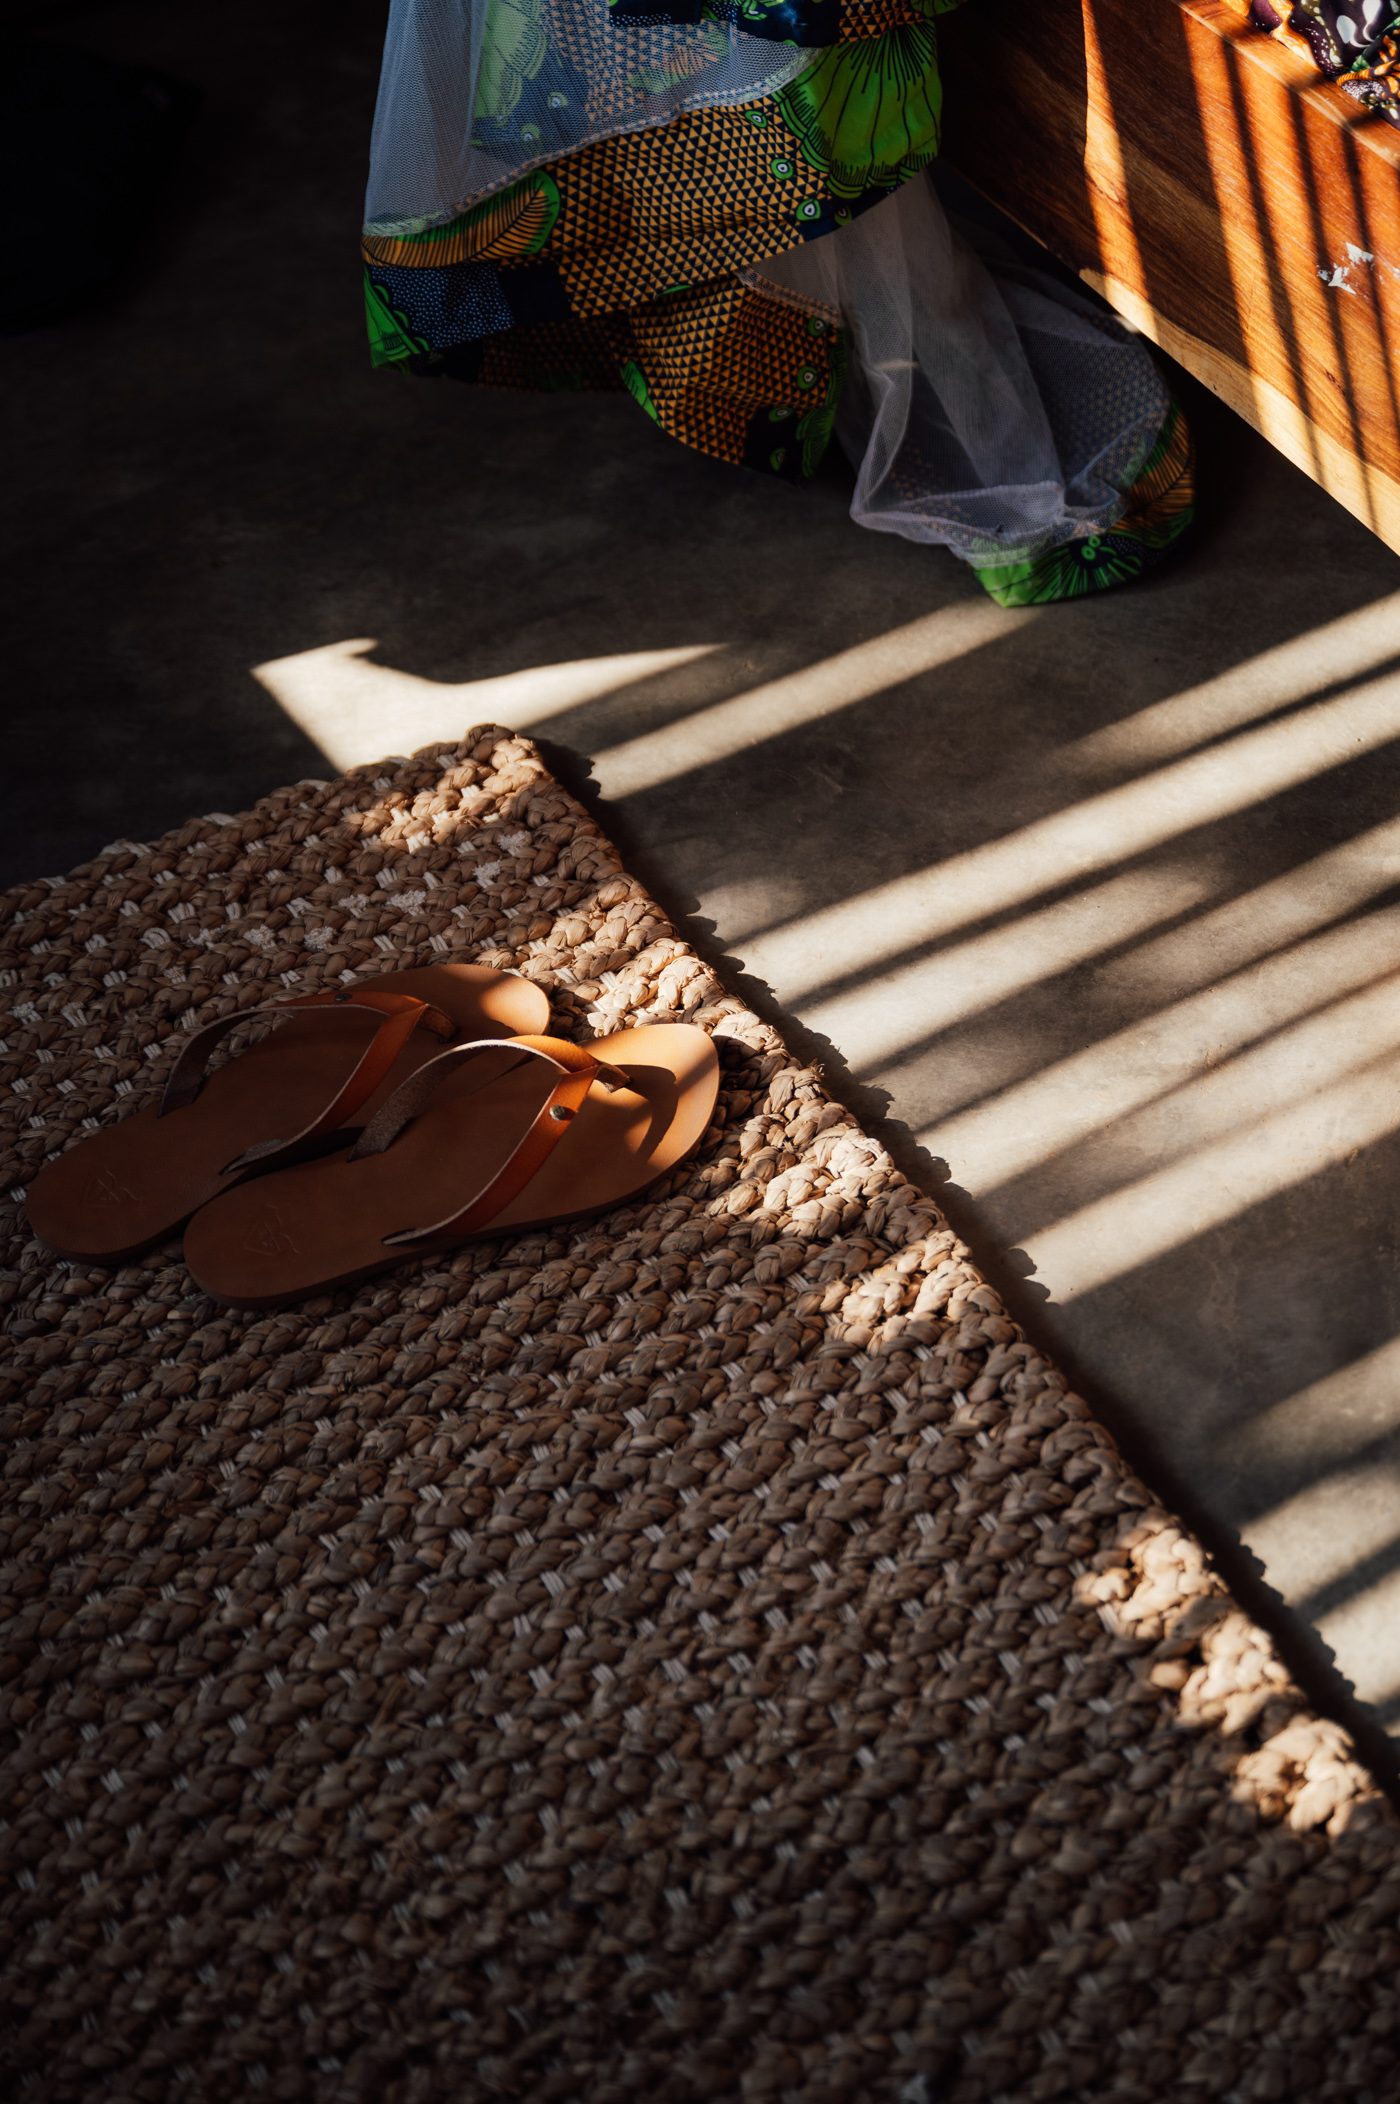 Slippers as part of a packing list for a safari